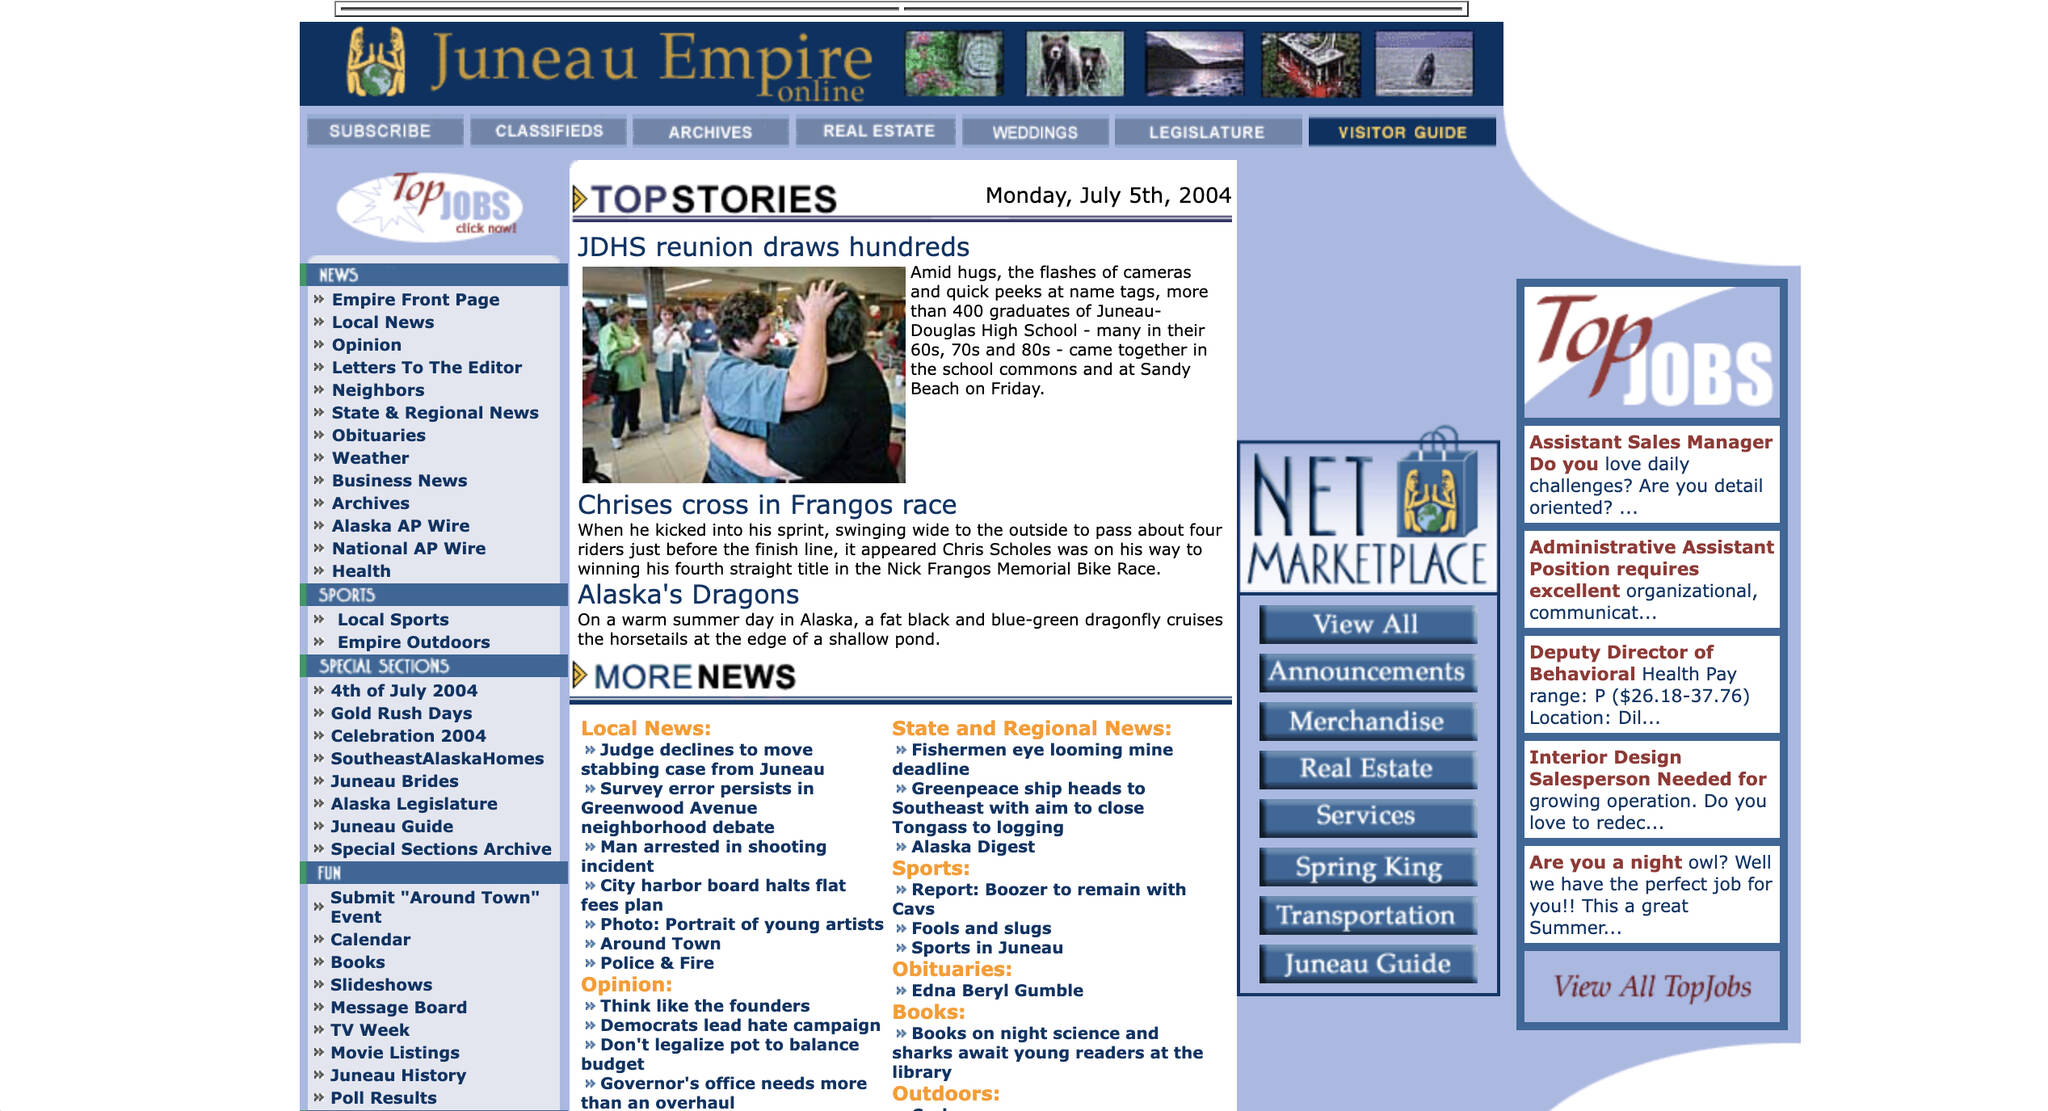 The Juneau Empire’s homepage on July 5, 2004, shows a major upgrade in design and amount of content compared to its early years. (Screenshot of juneauempire.com from the Internet Archive)